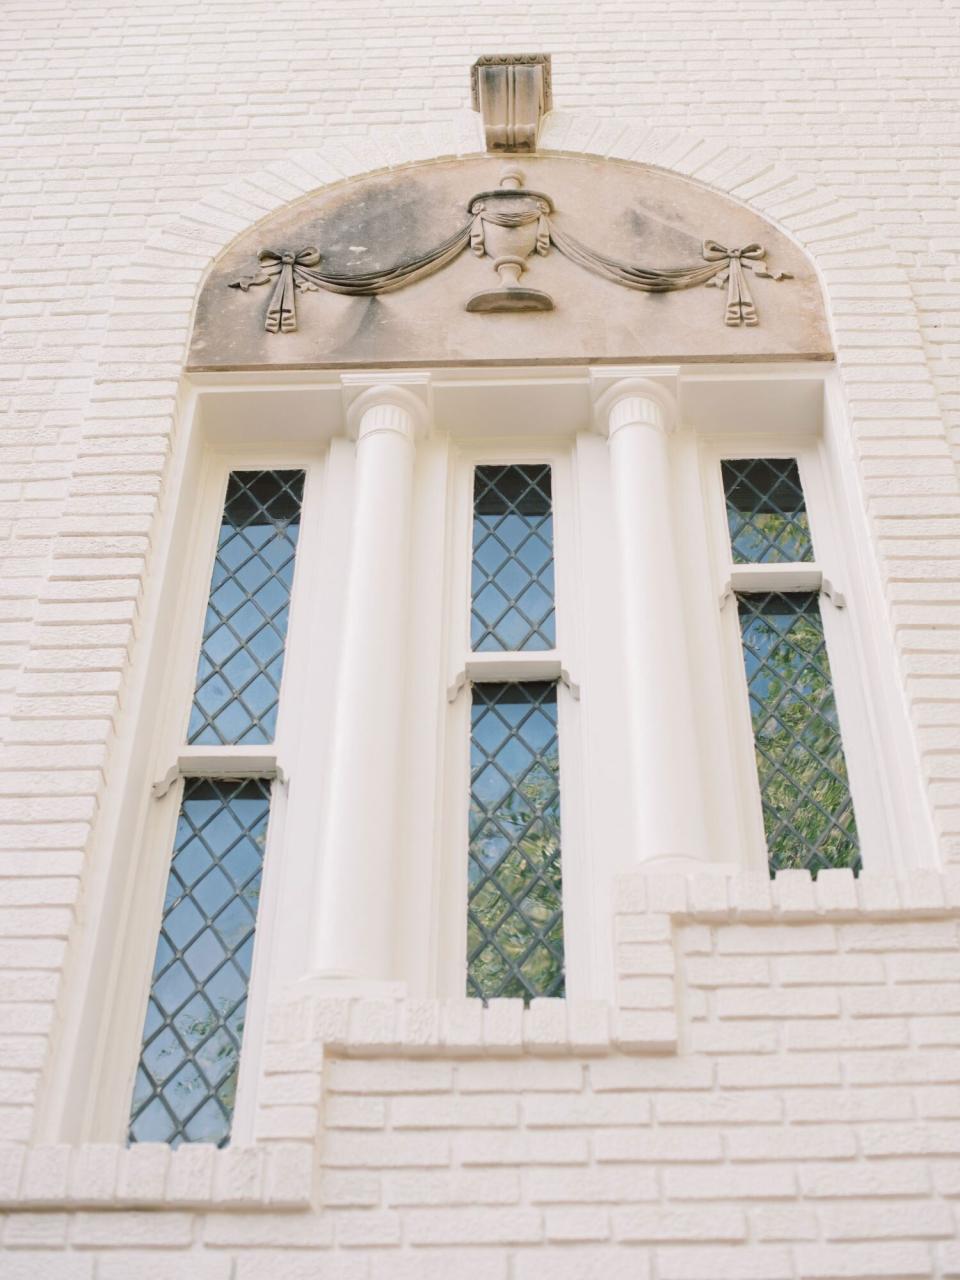 Historic Windows with Ornamental Cast Stone Fixture on Home Exterior